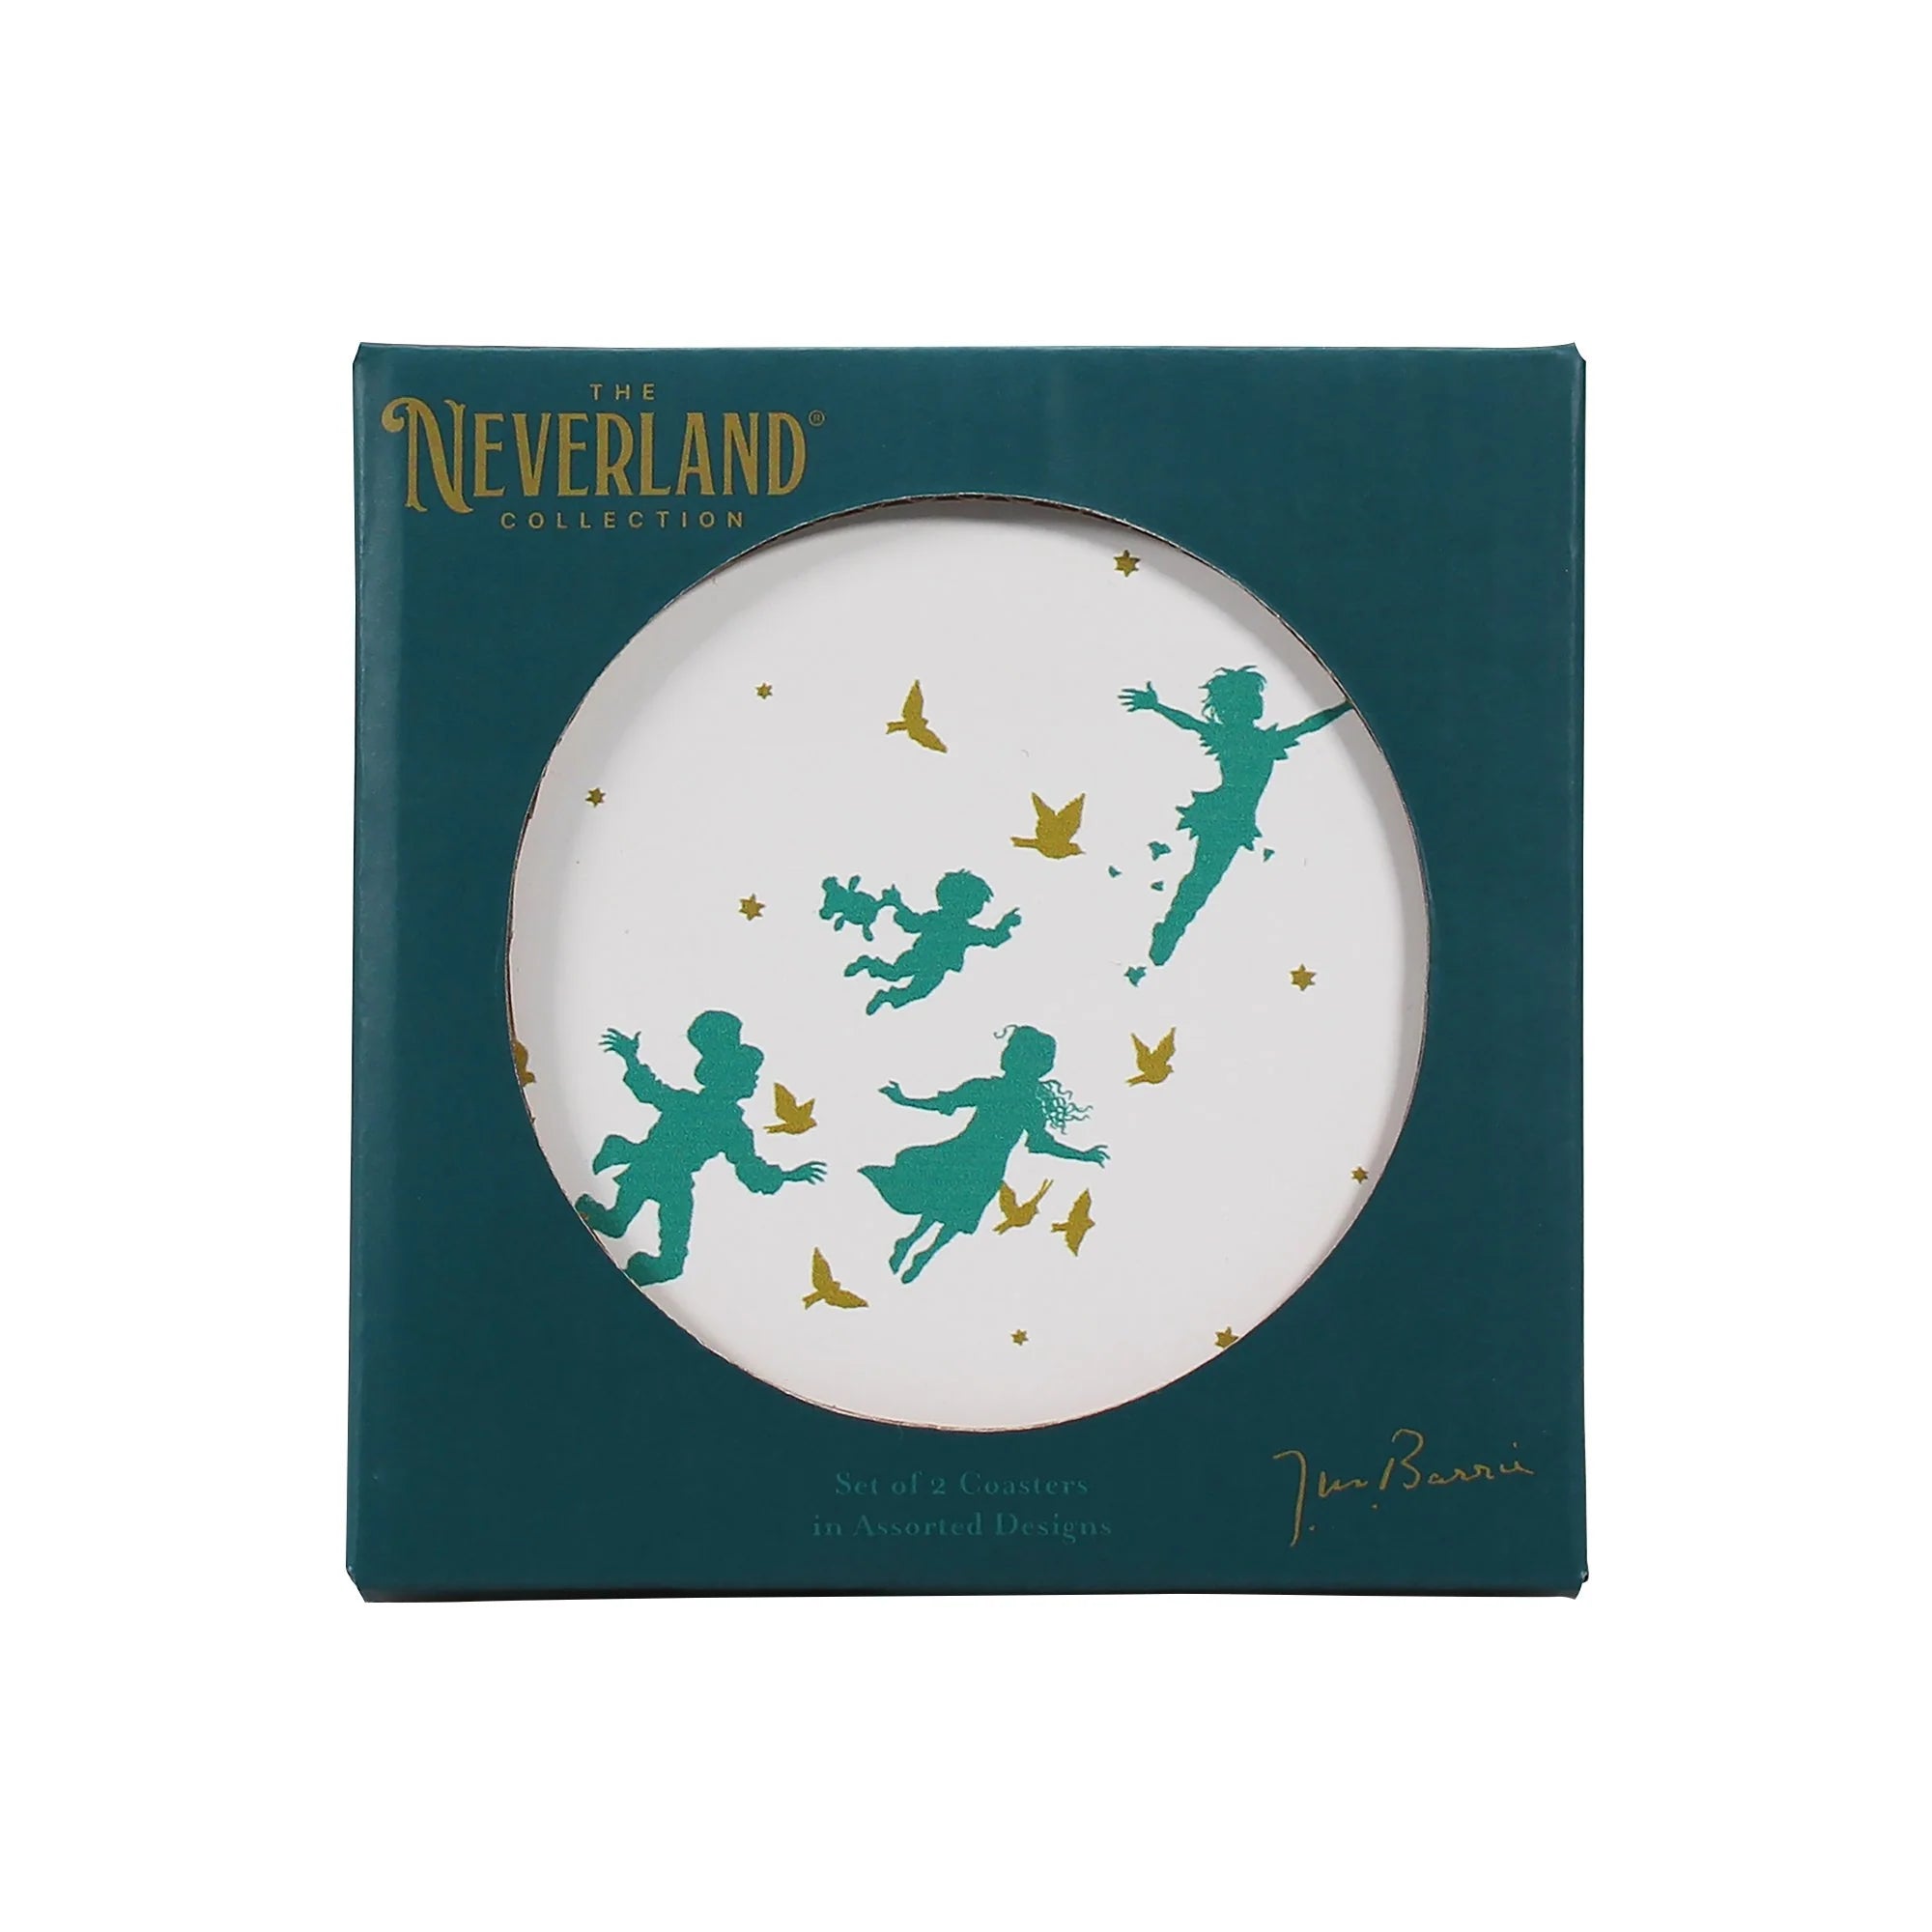 Shop Disney Neverland Set of 2 Ceramic Coasters - Premium Coasters from Half Moon Bay Online now at Spoiled Brat 